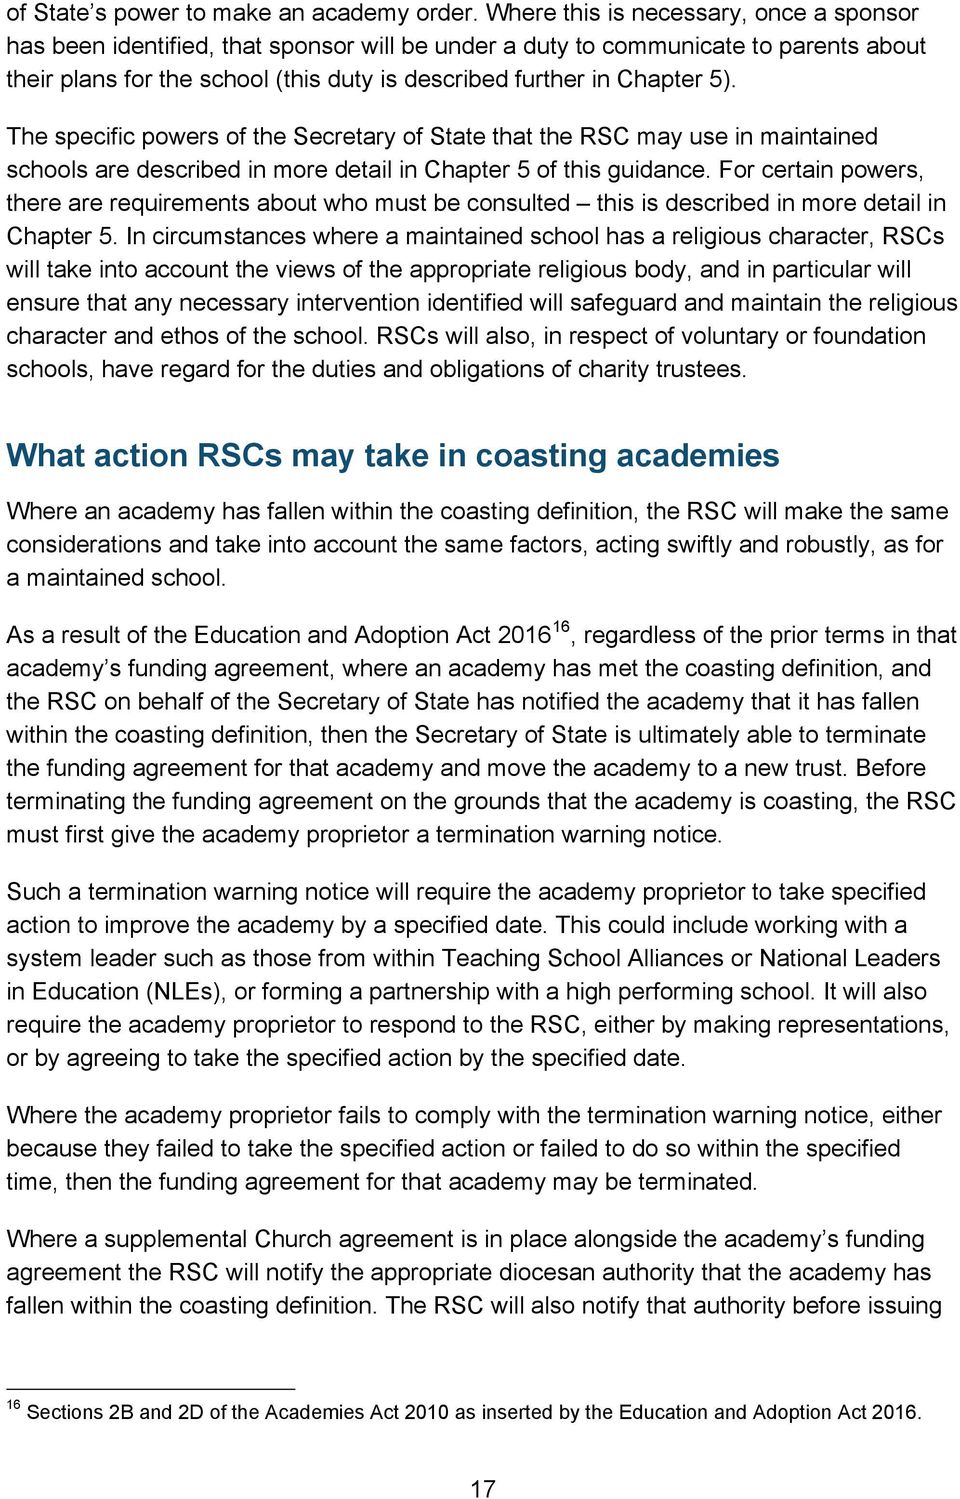 The specific powers of the Secretary of State that the RSC may use in maintained schools are described in more detail in Chapter 5 of this guidance.